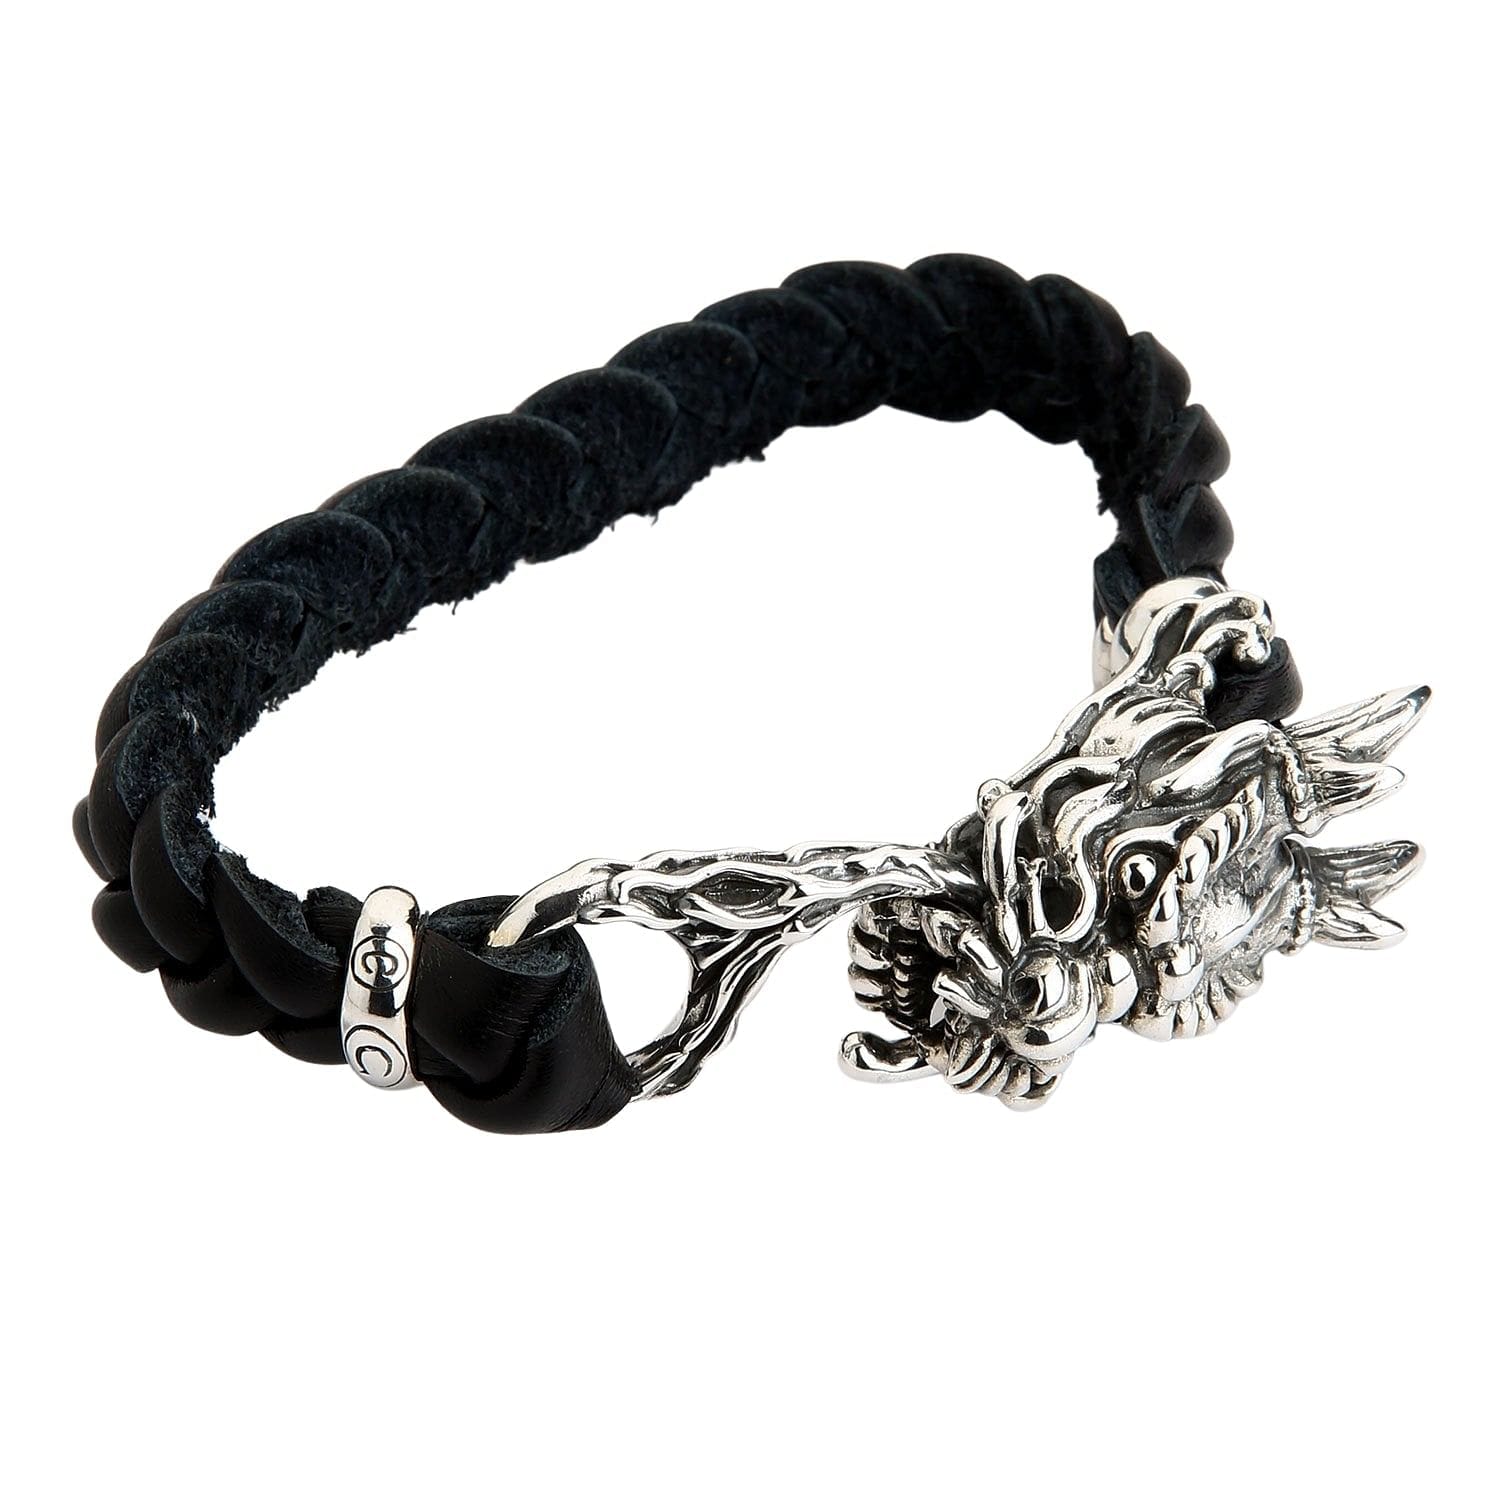 DRAGON Large Braided Leather Bracelet with Silver Dragon by King Baby